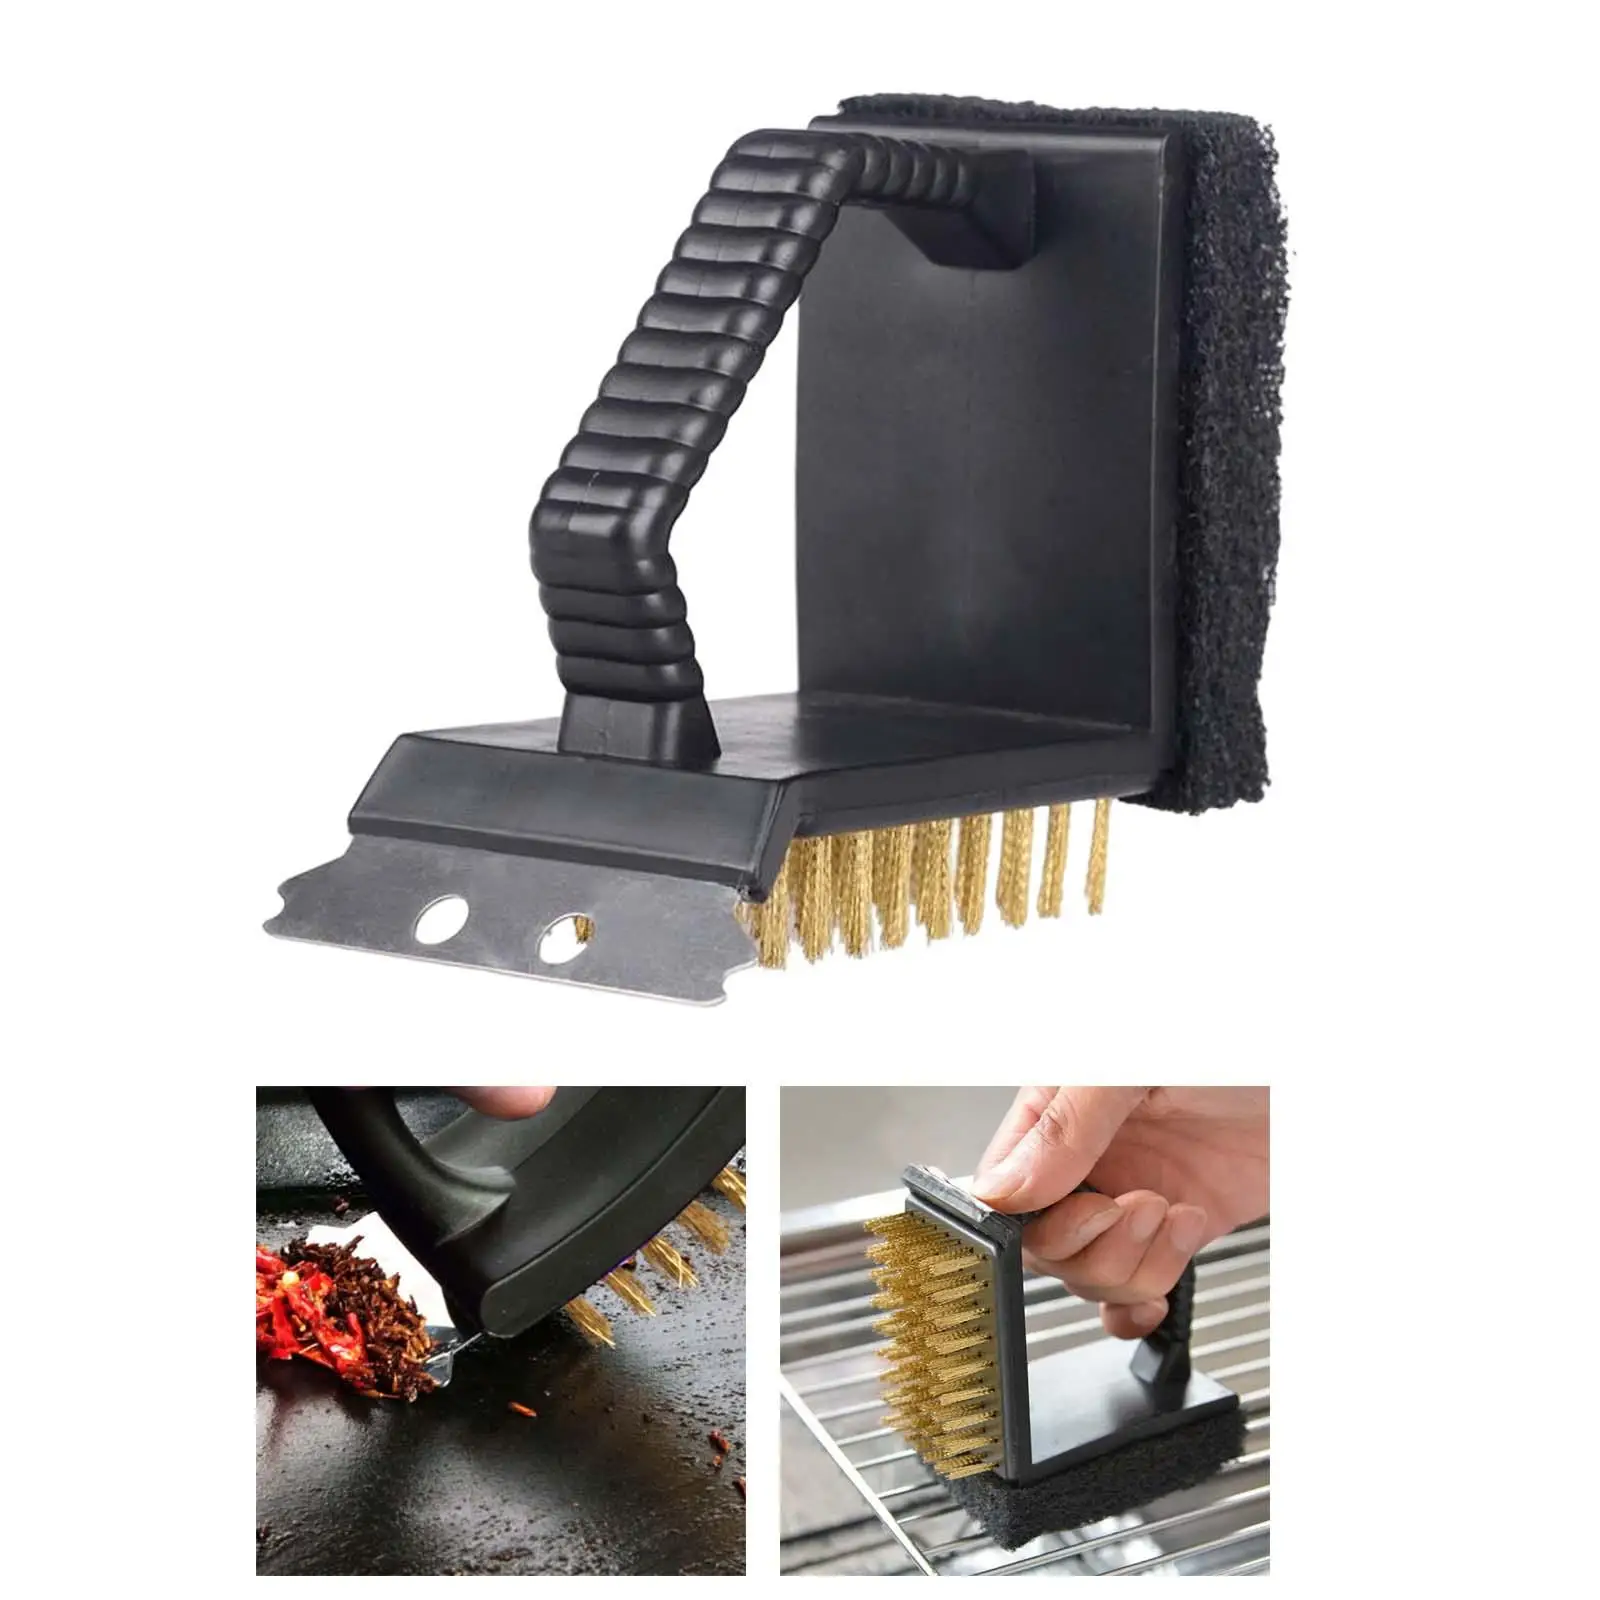 https://ae01.alicdn.com/kf/S7f08e92a13e84961ae2637530333a891o/3-in-1-Grill-Brush-with-Scraper-Copper-Wire-Brush-BBQ-Cleaning-Brush-for-All-Grates.jpg